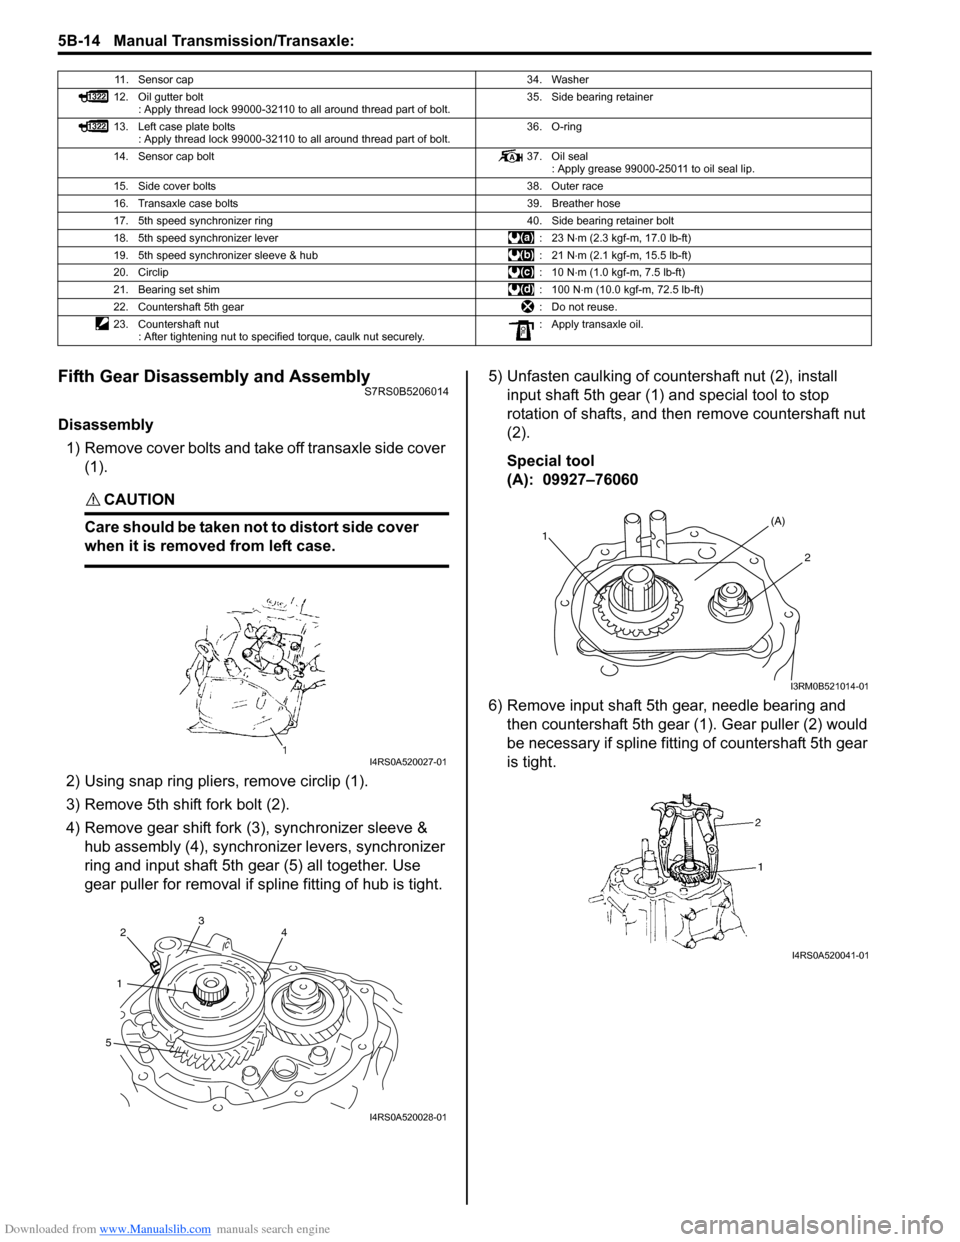 SUZUKI SWIFT 2006 2.G Service User Guide Downloaded from www.Manualslib.com manuals search engine 5B-14 Manual Transmission/Transaxle: 
Fifth Gear Disassembly and AssemblyS7RS0B5206014
Disassembly1) Remove cover bolts and take off transaxle 